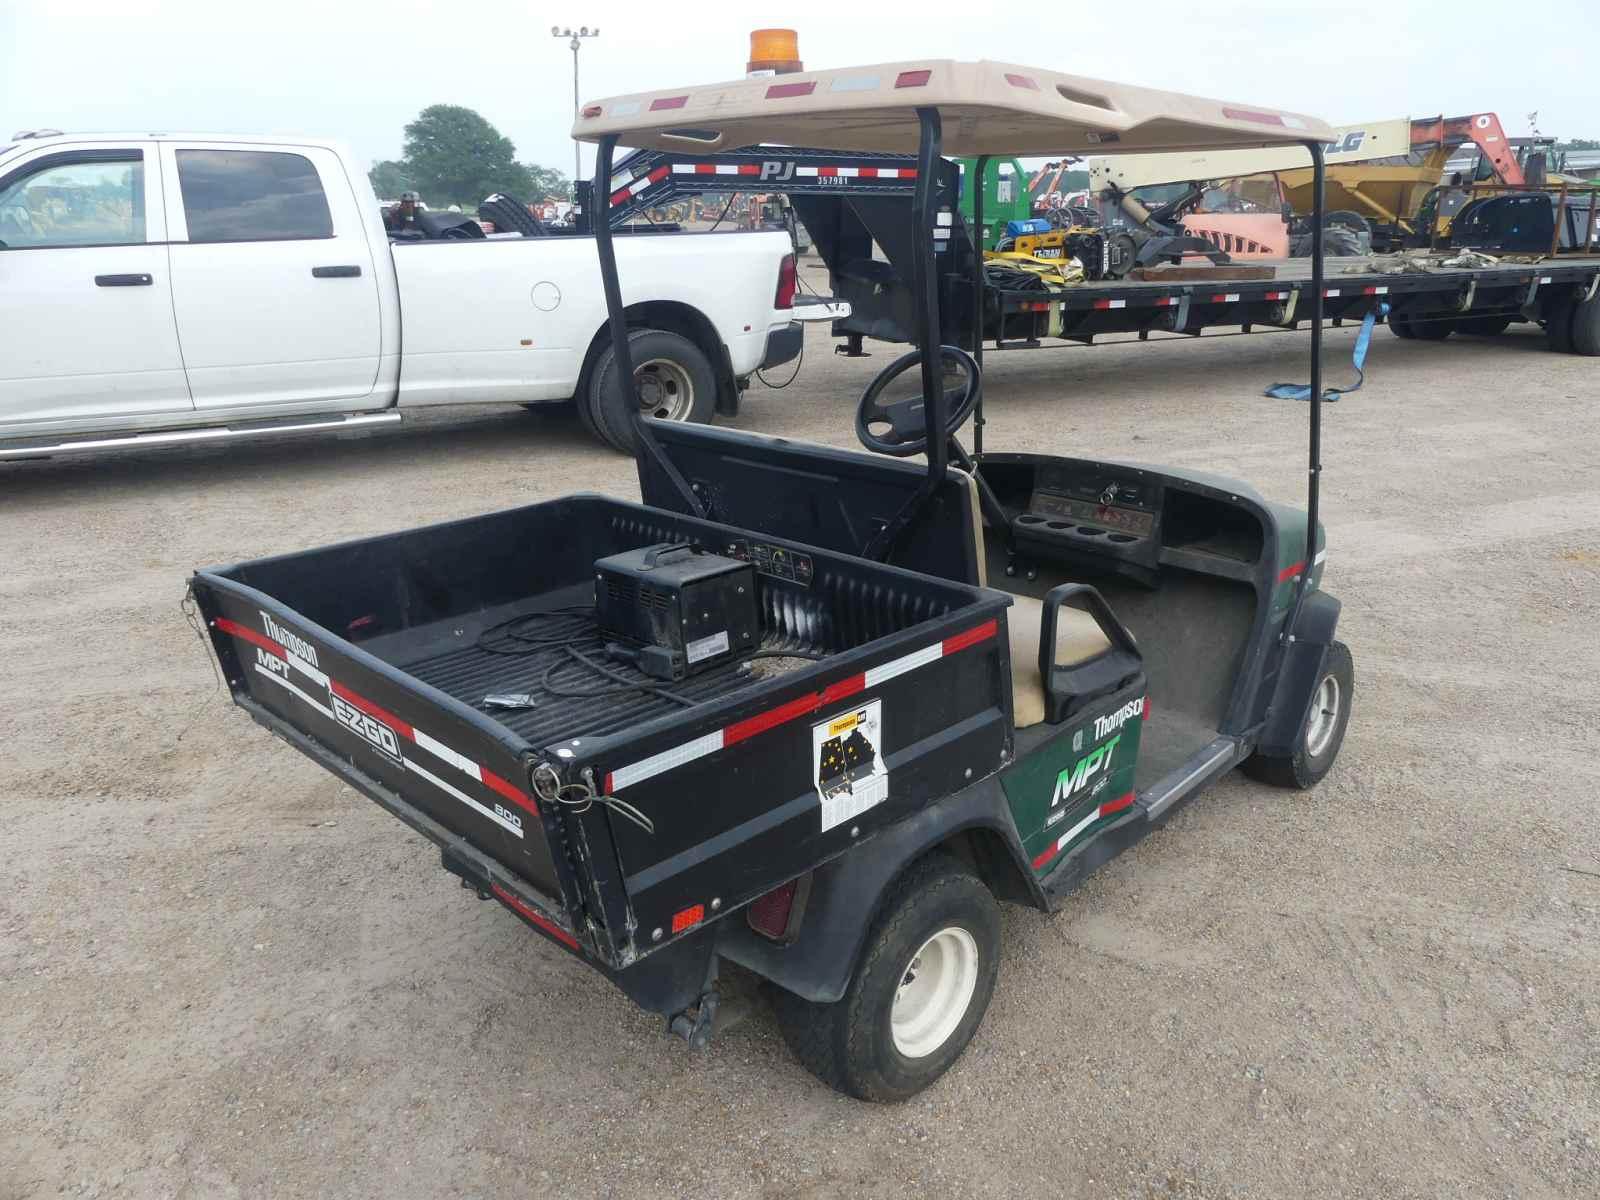 2004 EZGo Electric Golf Cart, s/n 2177927 (No Title): w/ Charger